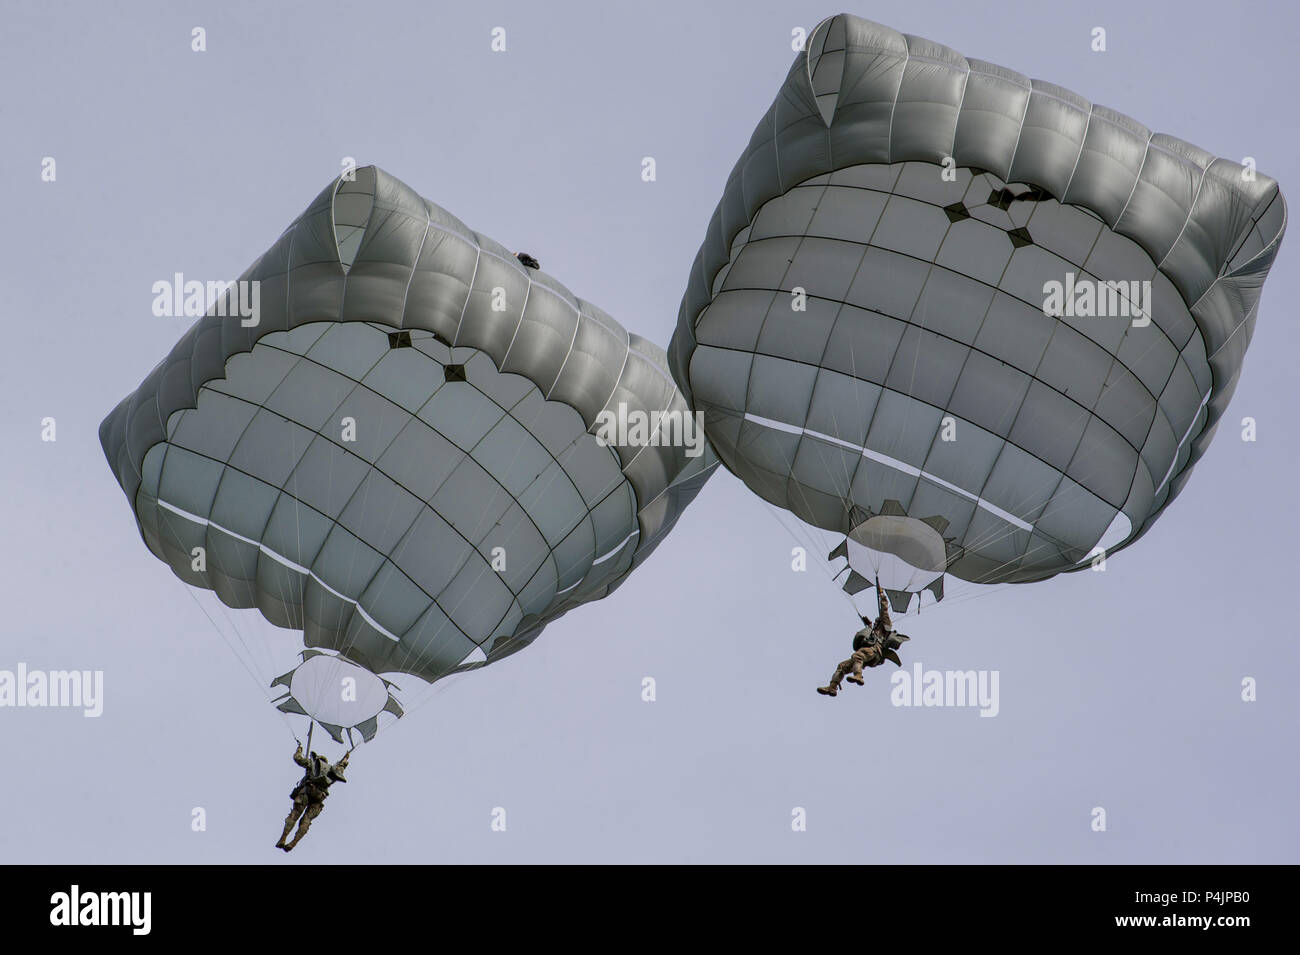 Paratroopers assigned to the 4th Infantry Brigade Combat Team (Airborne), 25th Infantry Division, U.S. Army Alaska, conduct an airborne proficiency operation on Malemute drop zone at Joint Base Elmendorf-Richardson, Alaska, June 13, 2018, during Exercise Arctic Aurora with Japan Ground Self-Defense Force Soldiers. Arctic Aurora is a bilateral training exercise involving elements of the Spartan Brigade and the JGSDF, which focuses on strengthening ties between the two by executing combined small unit airborne proficiency operations and basic small arms marksmanship. (U.S. Air Force photo by Jus Stock Photo